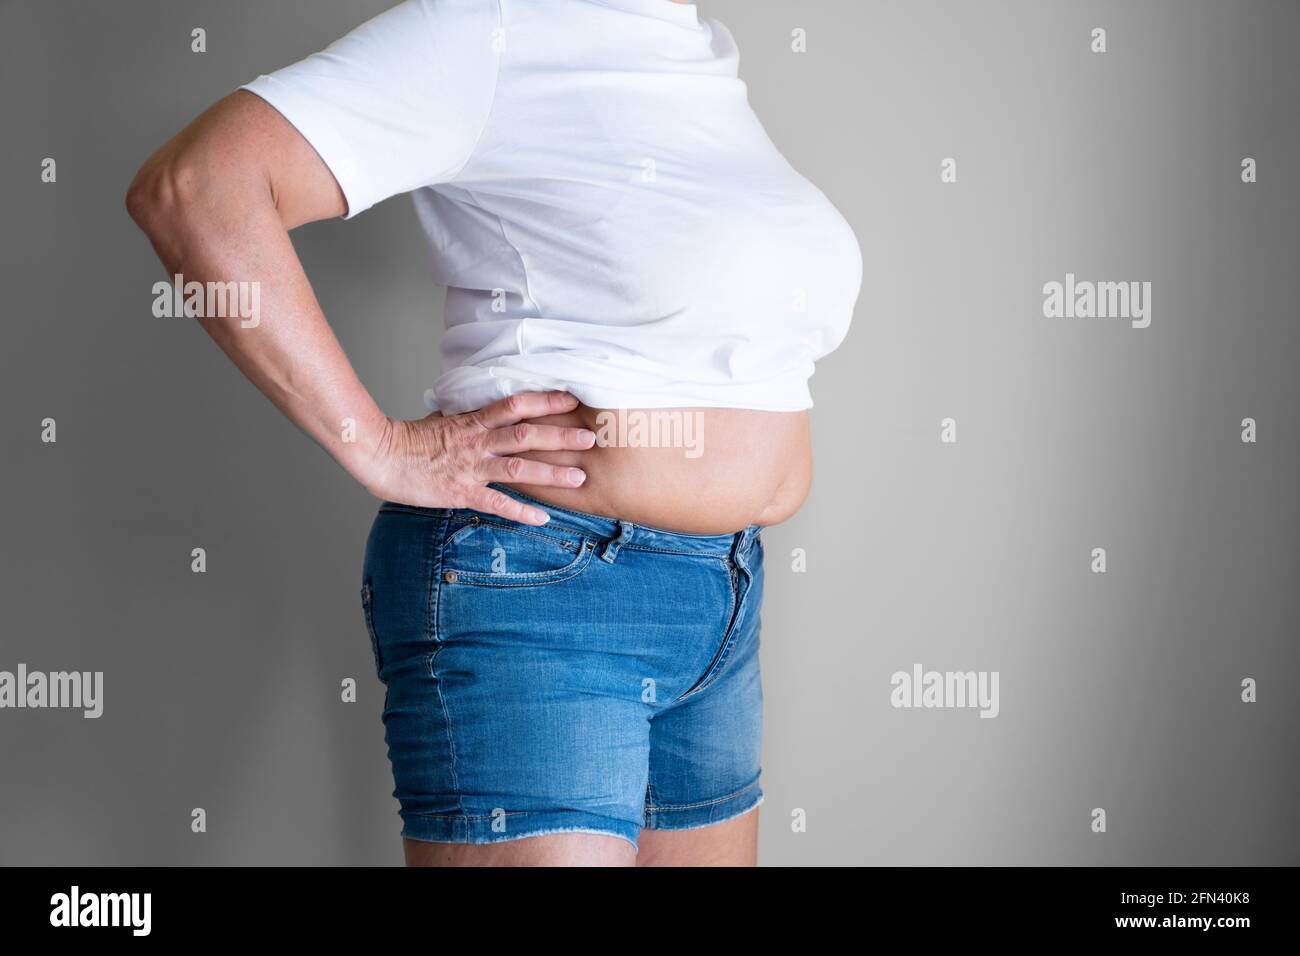 Fat Woman Belly Button And Body On Diet Stock Photo